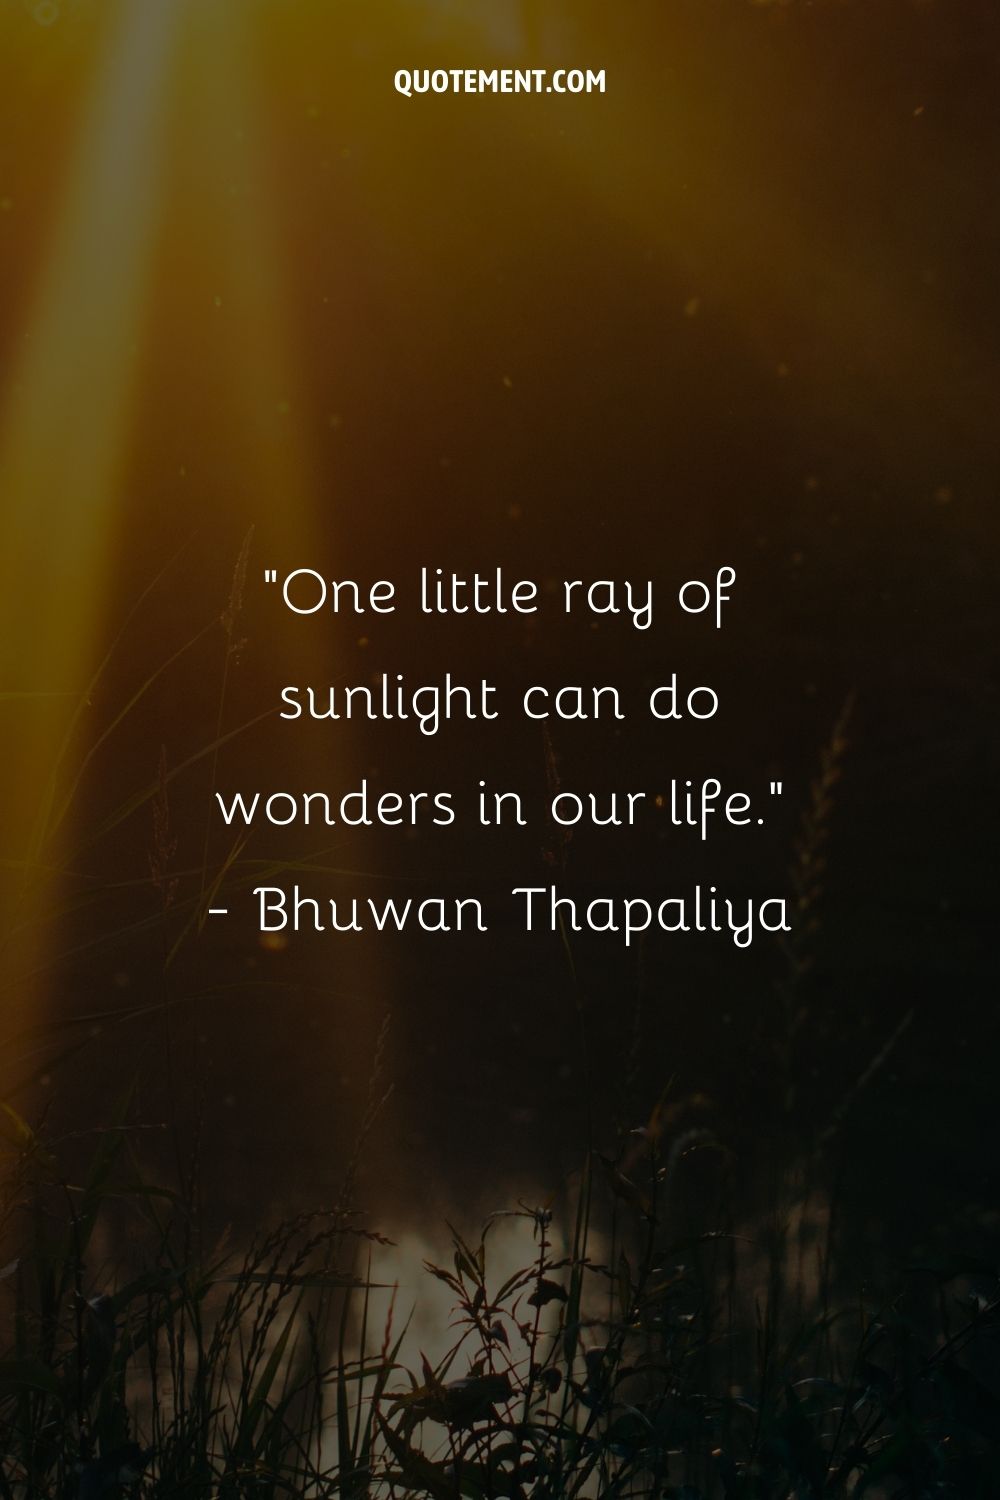 One little ray of sunlight can do wonders in our life